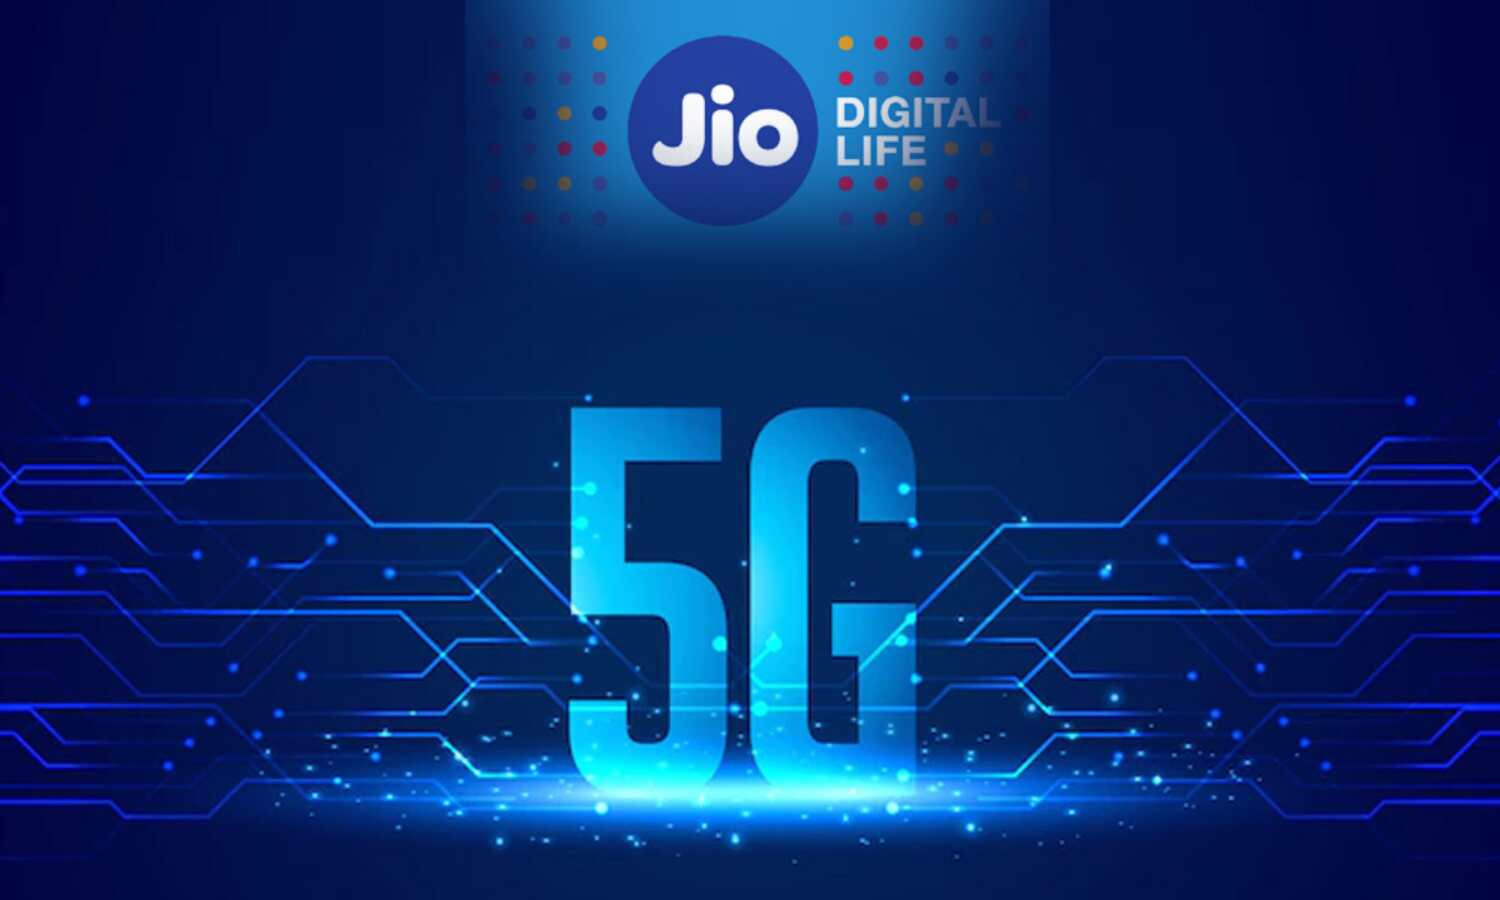 Jio plans to launch 5G Services in top 1000 cities in India - Smartprix